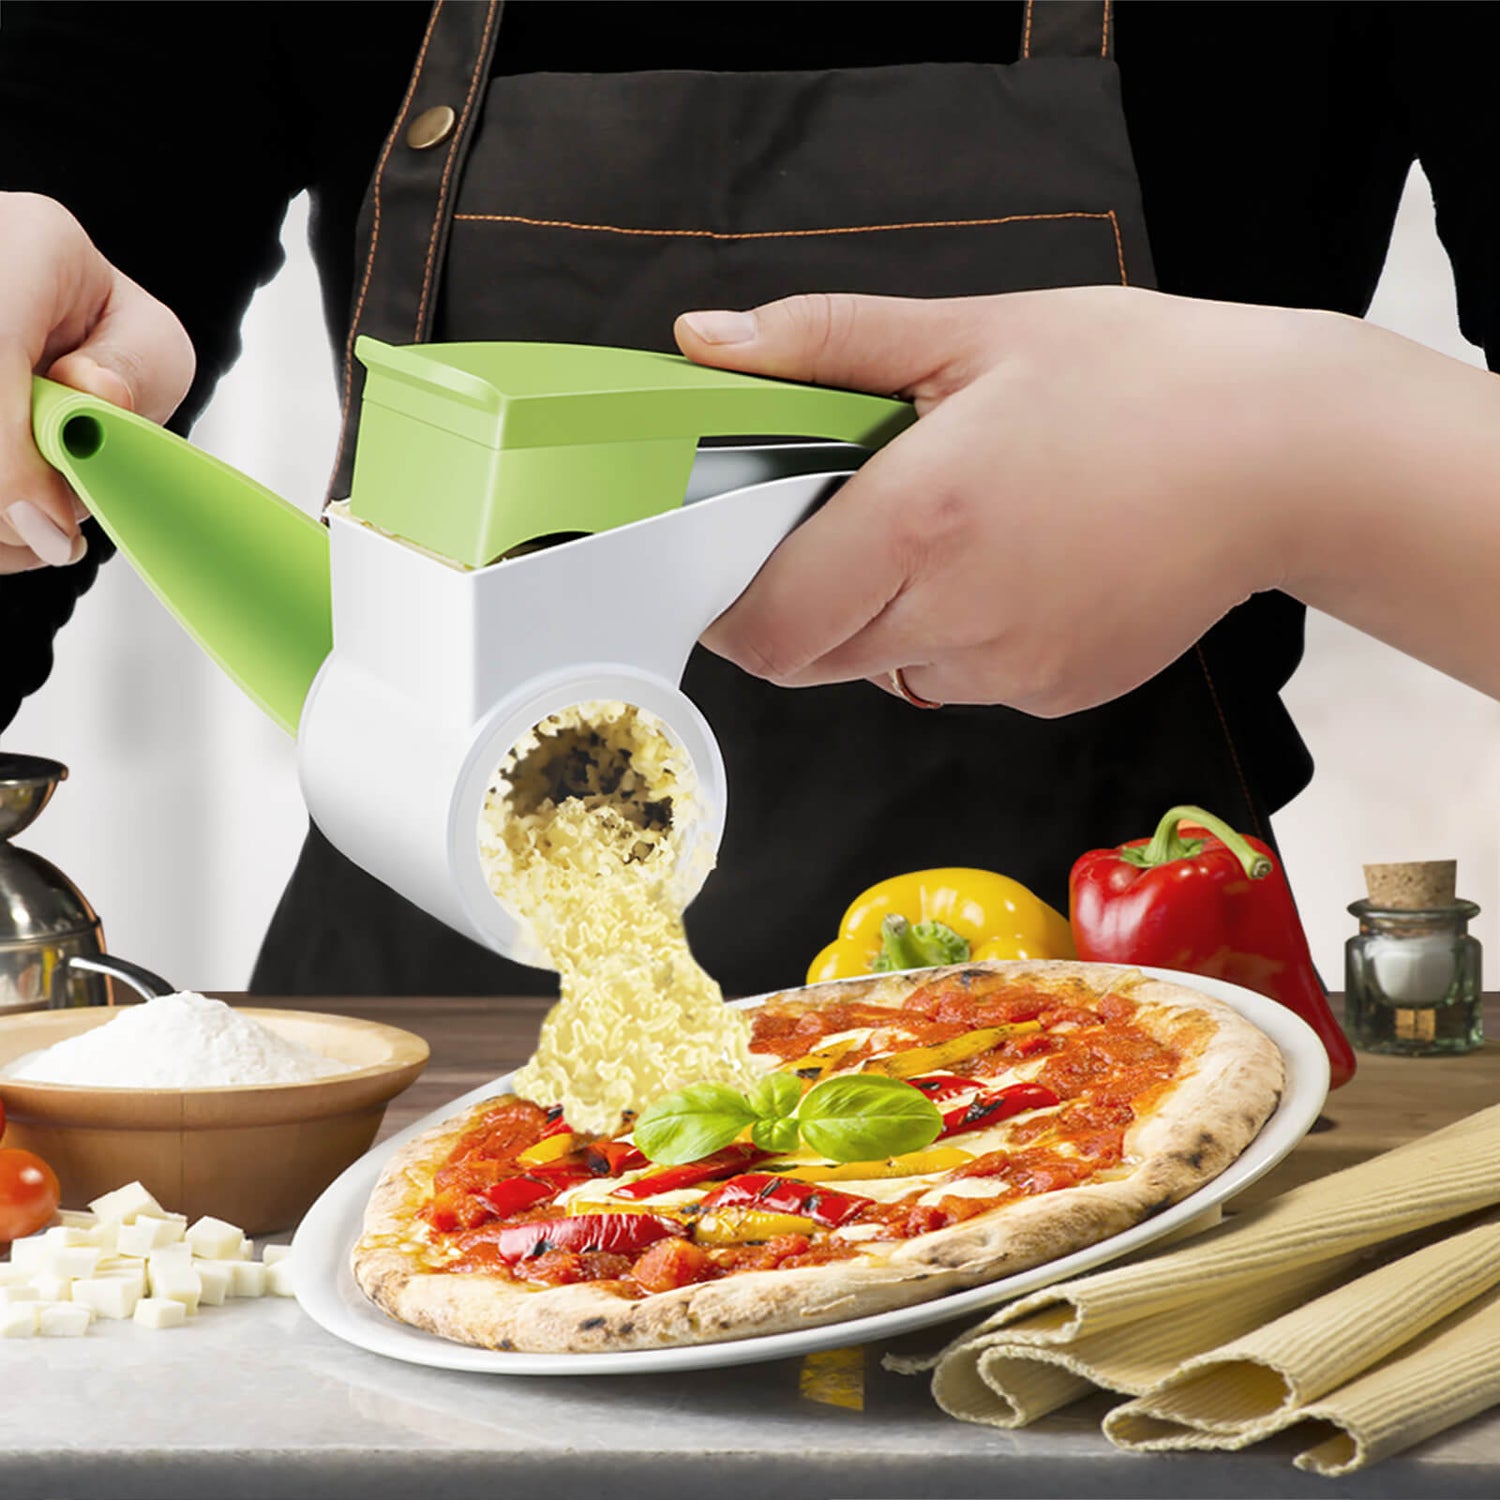 Rotary Cheese Grater Manual Handheld Cheese Grater With Stainless